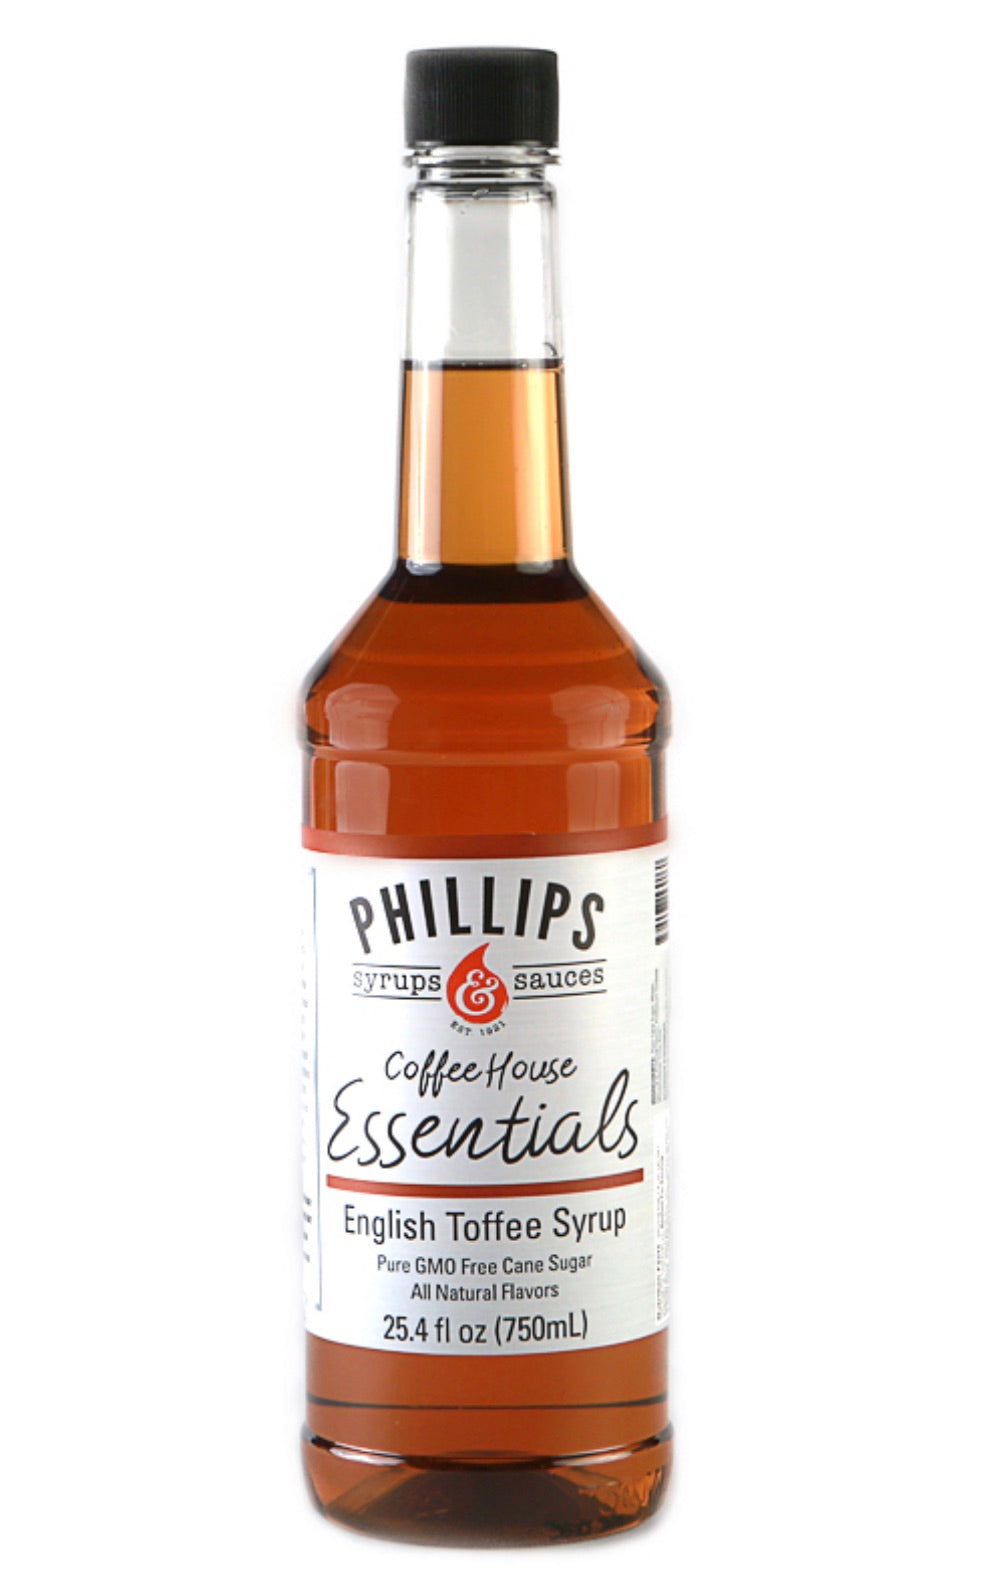 Phillips Coffee Syrup